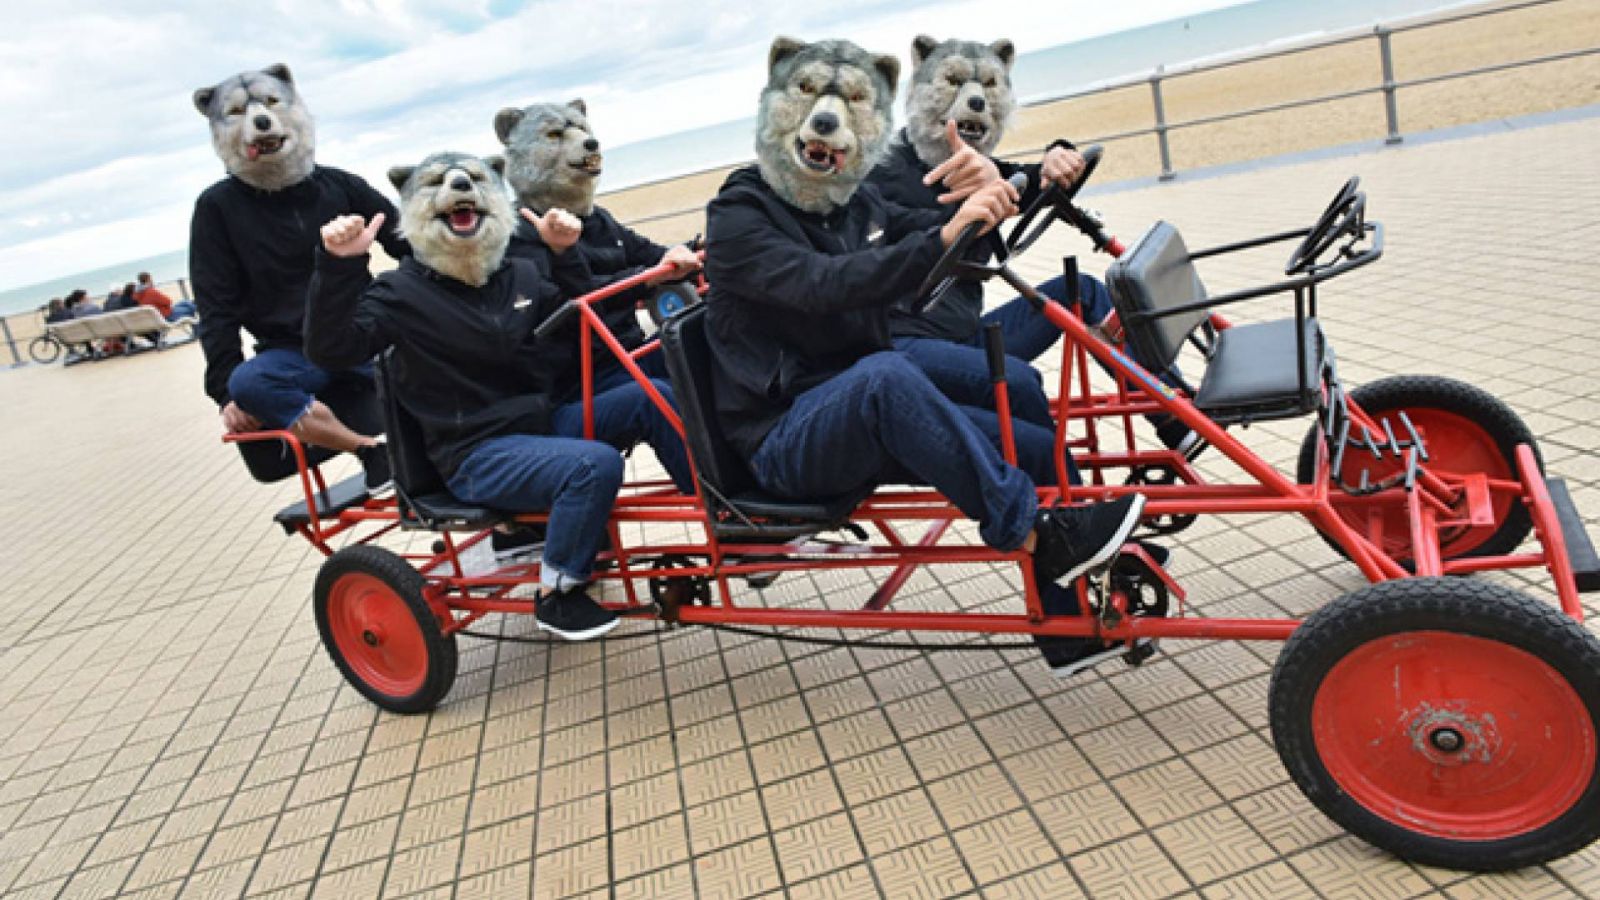 MAN WITH A MISSION haastattelussa Japan Expossa © Sony Music Entertainment (Japan) Inc. All rights reserved.